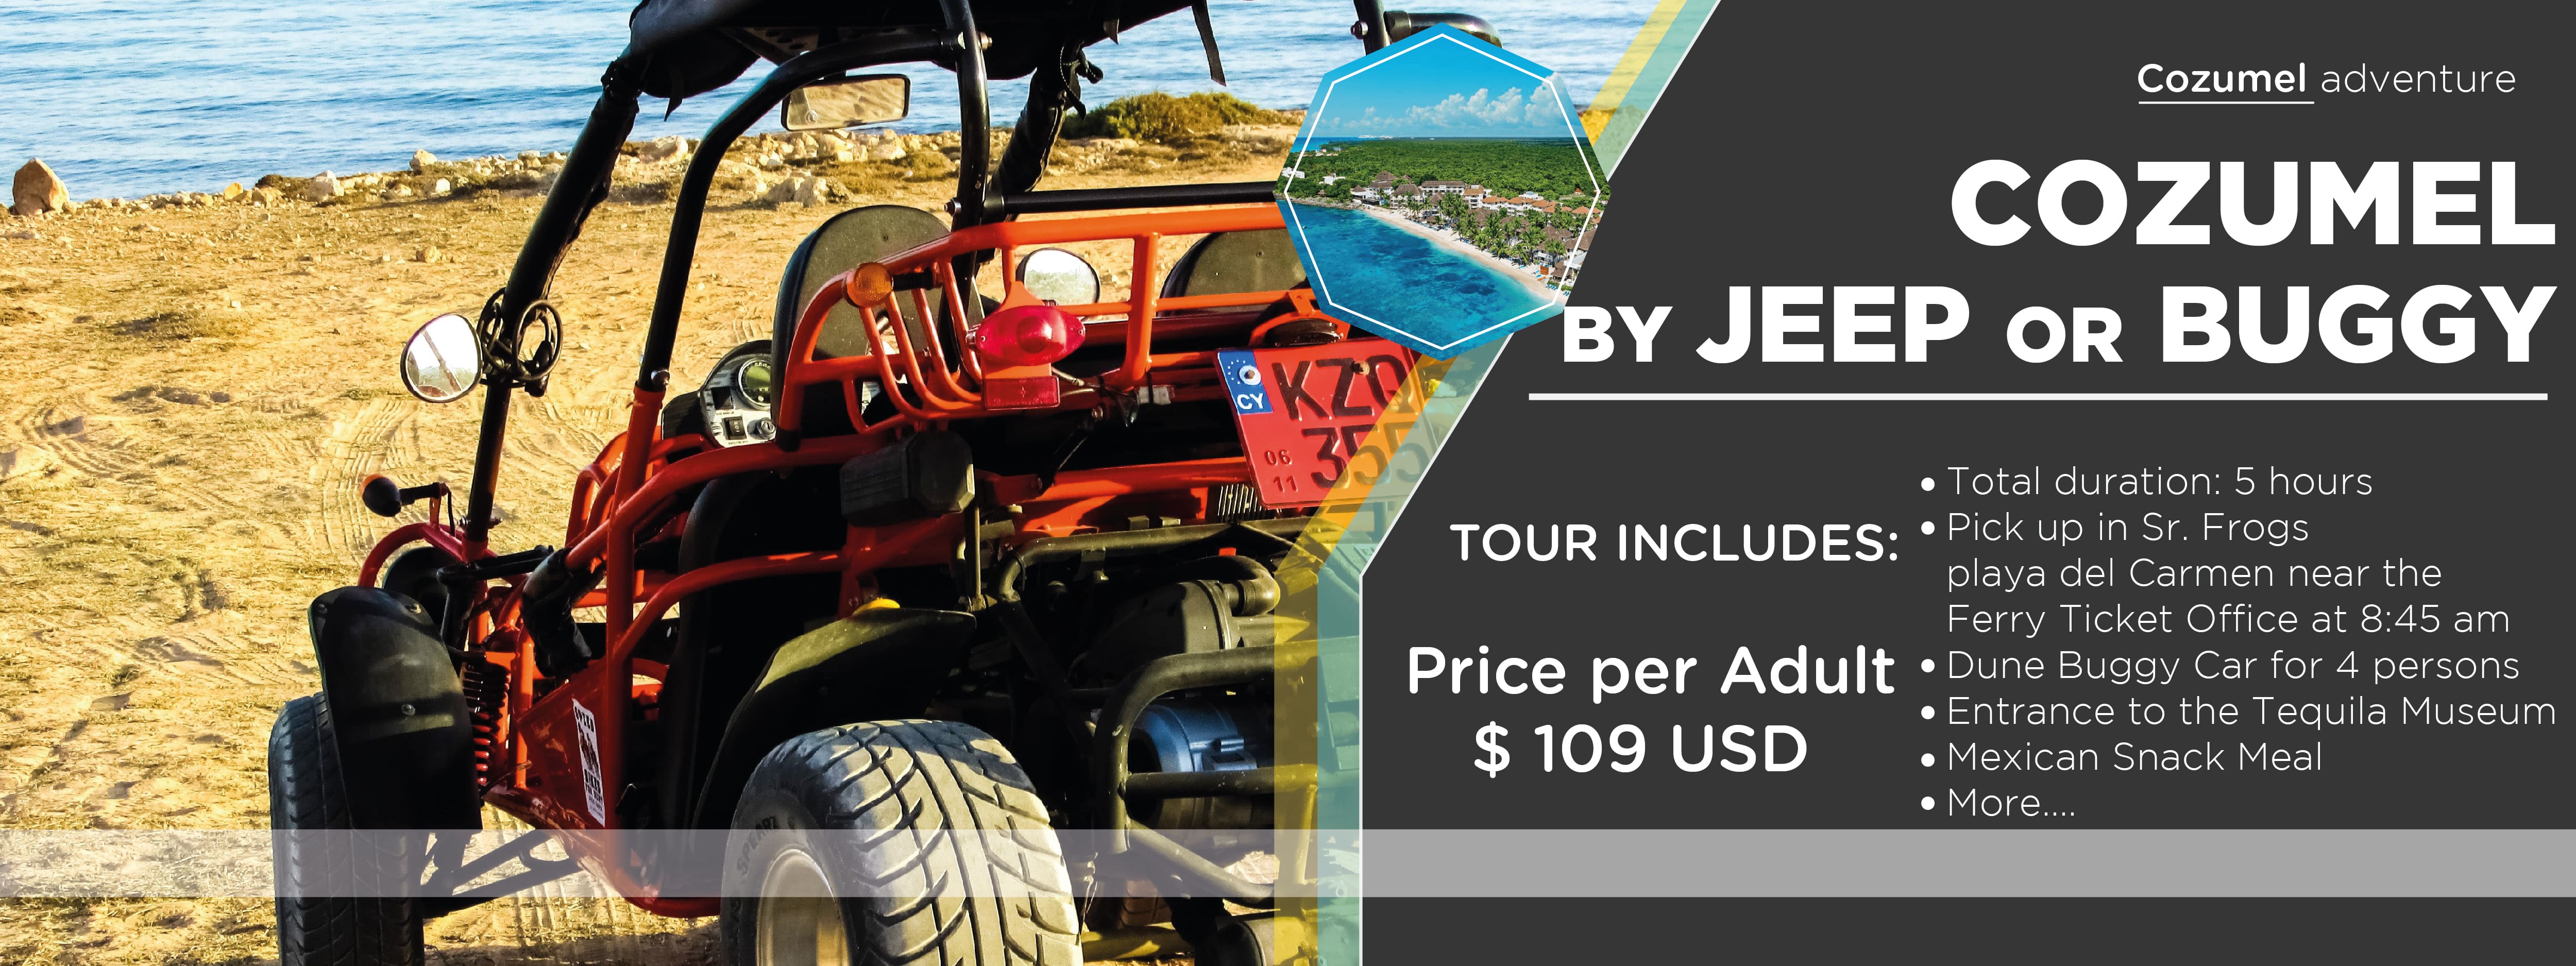 COZUMEL BY JEEP OR BUGGY